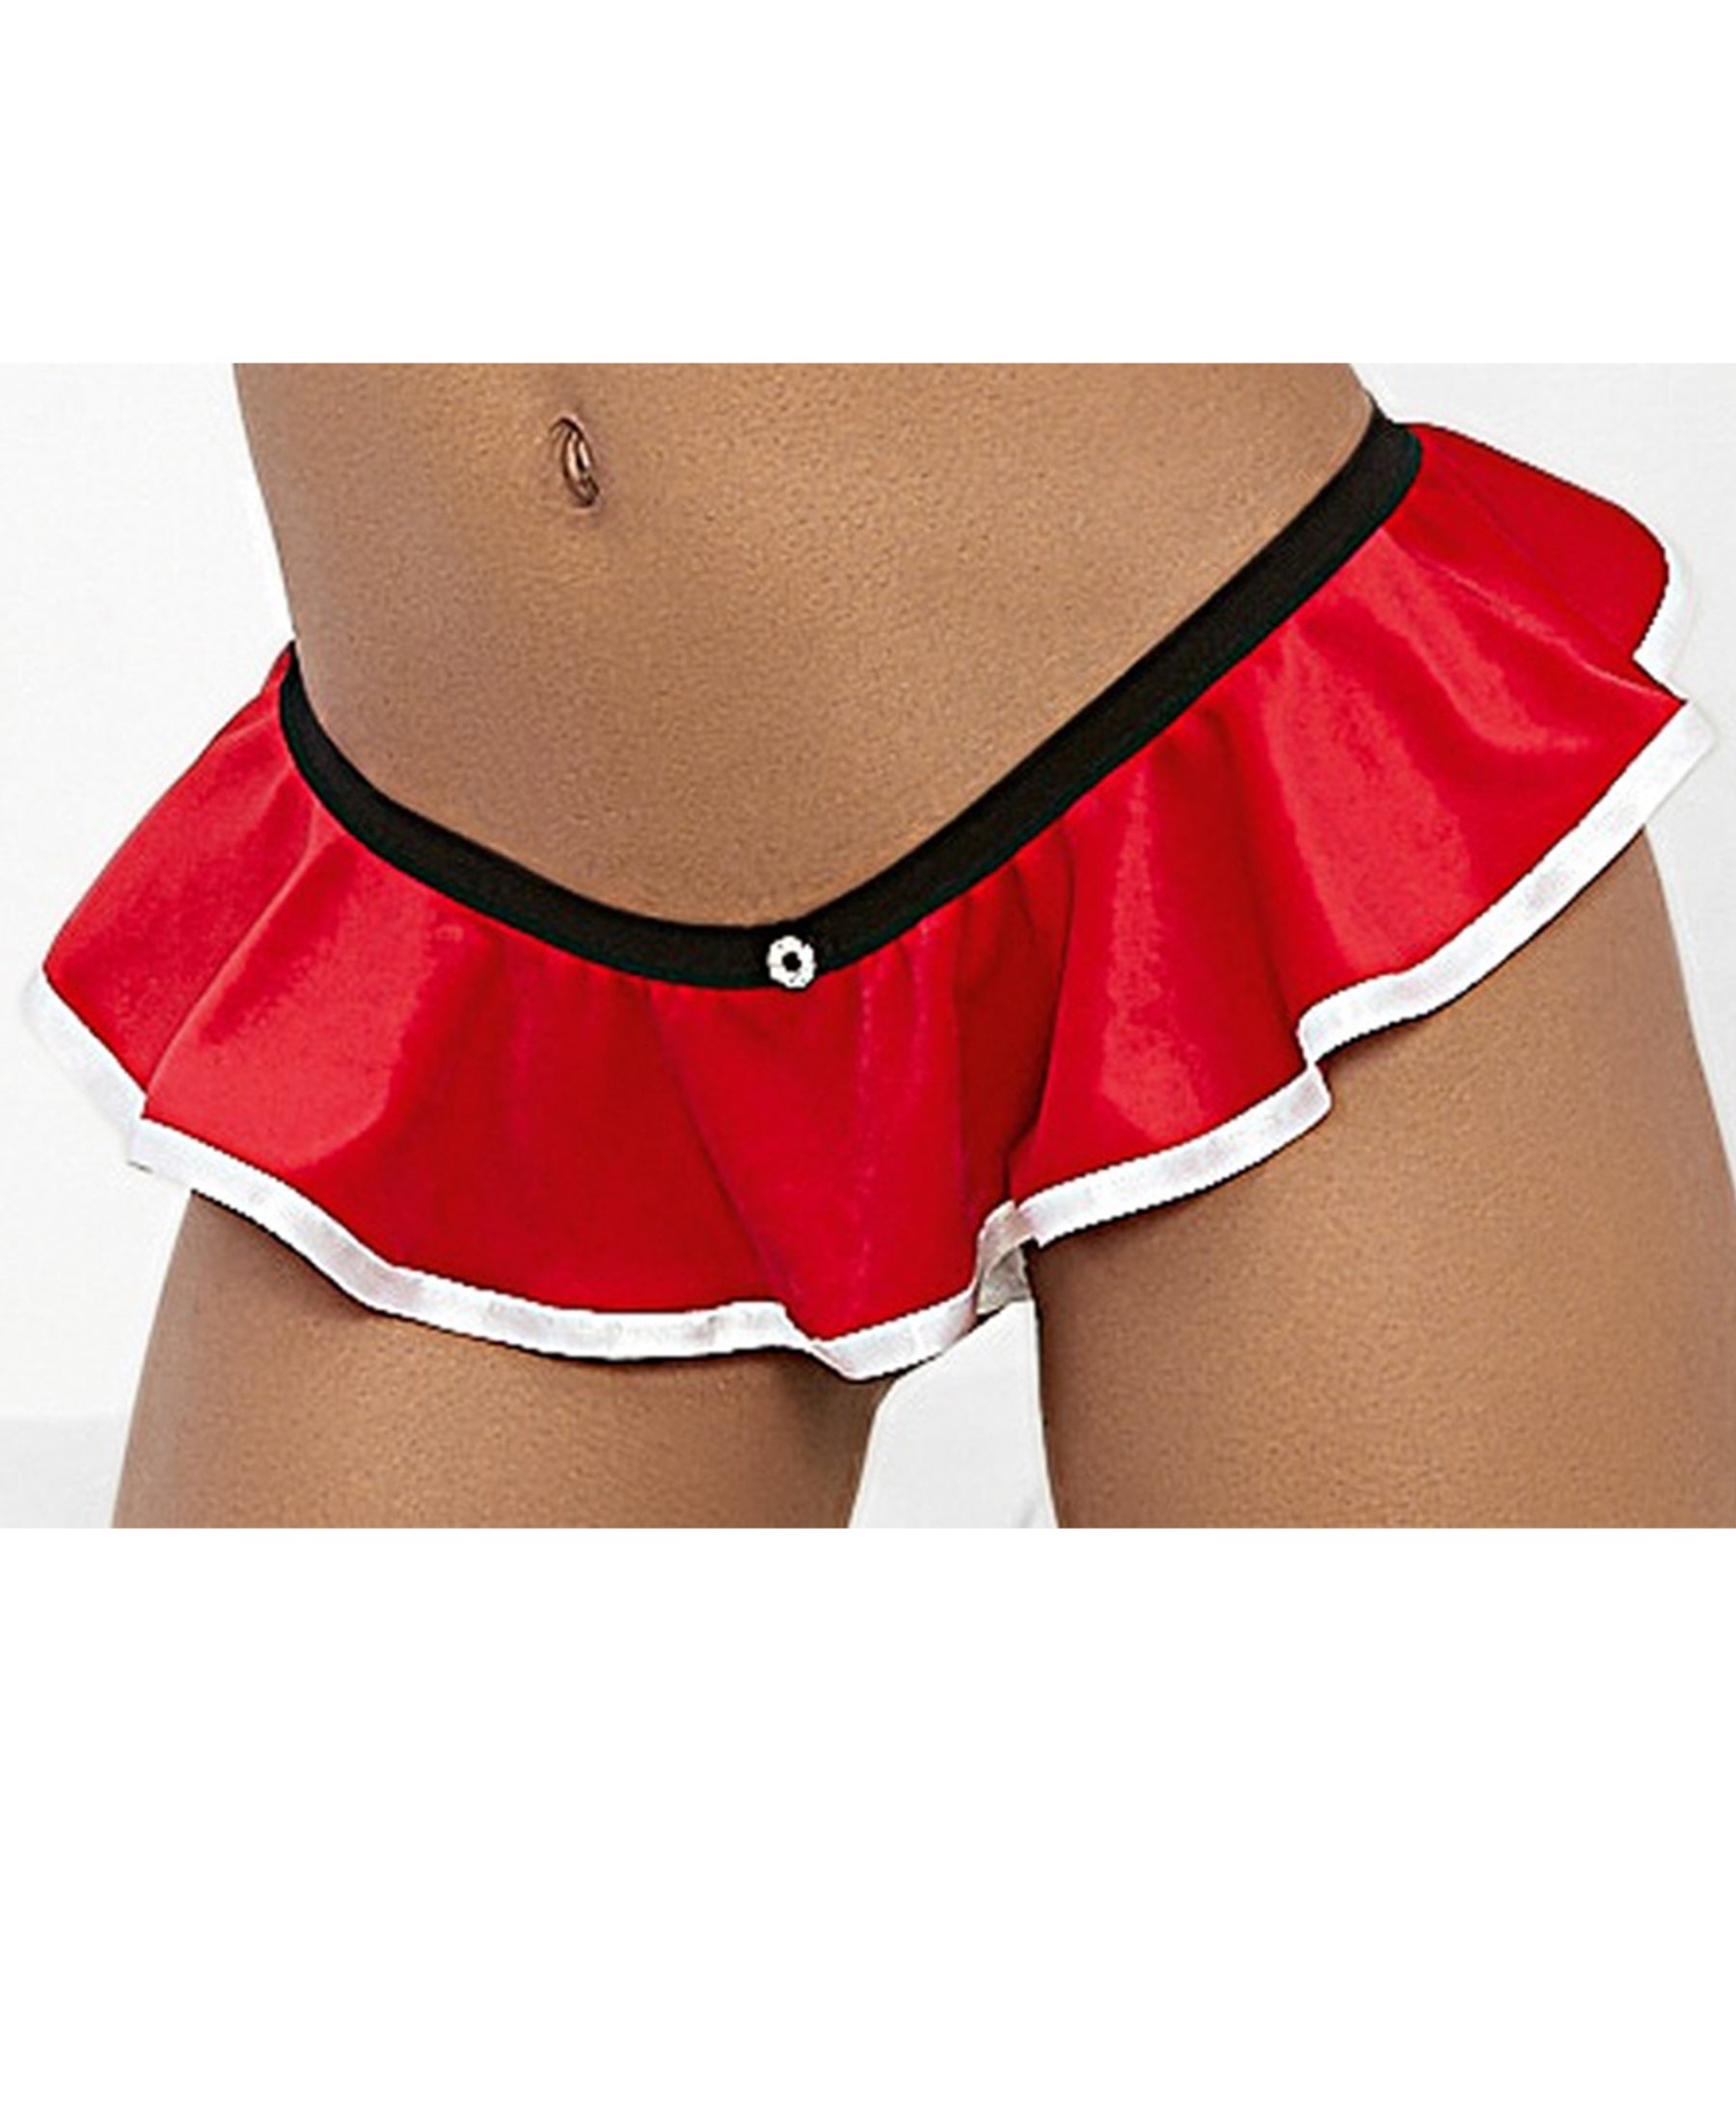 70009 Holiday Pom Pom Panty front view